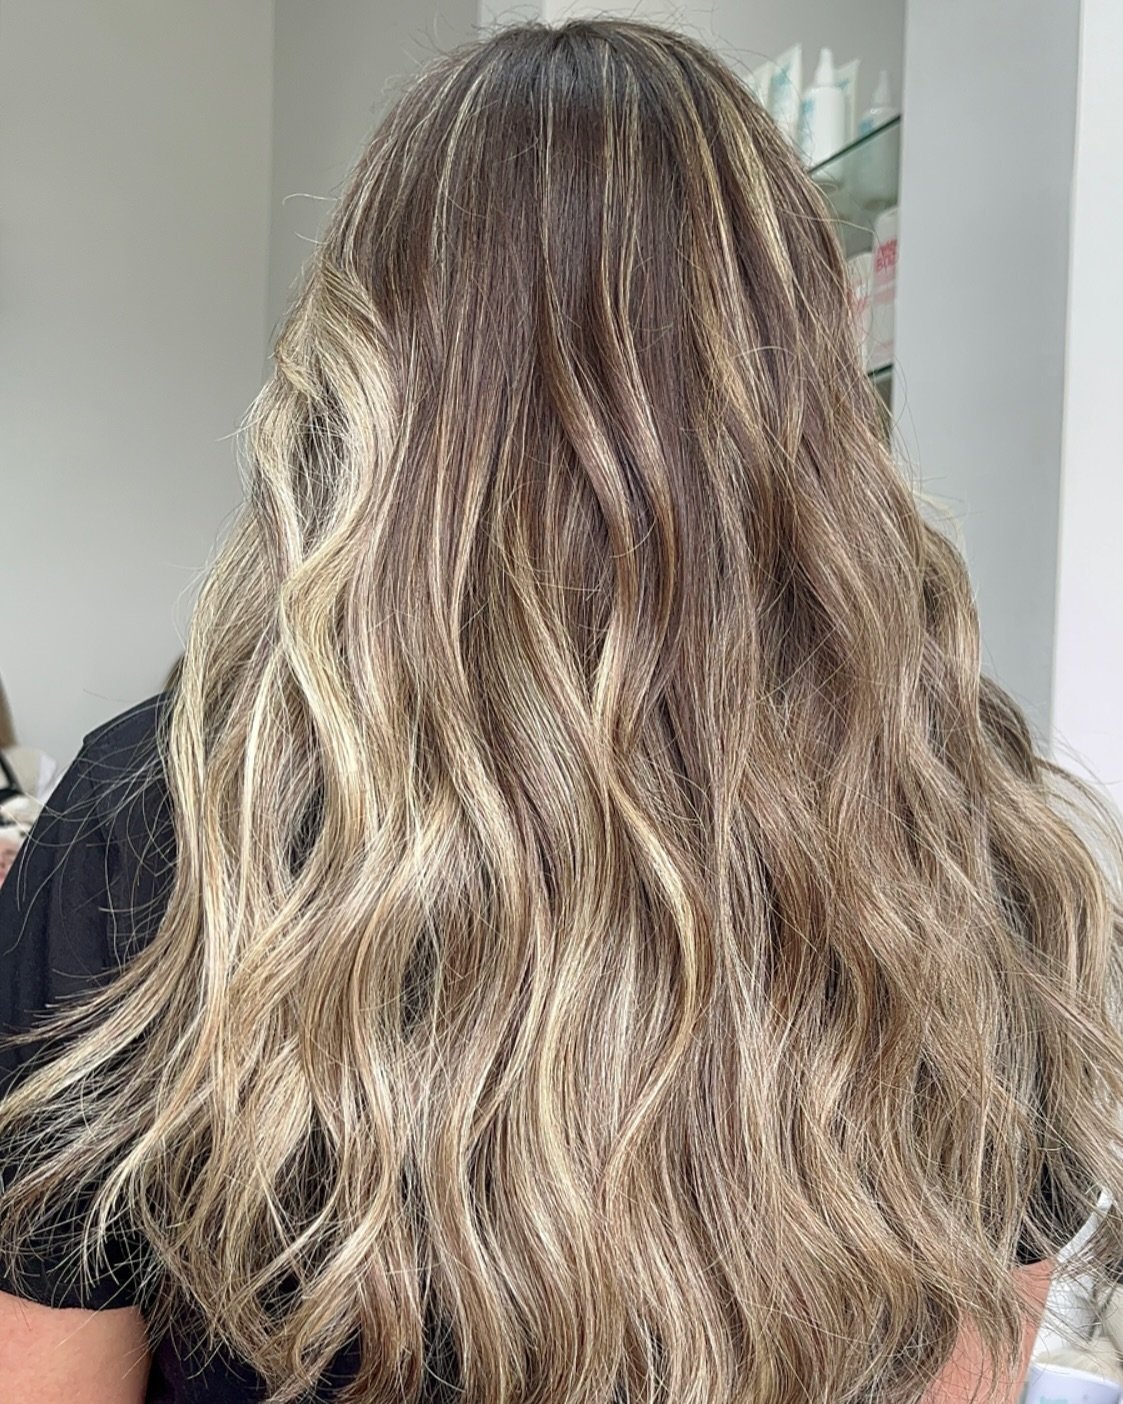 Waves for daysssss

It&rsquo;s the return of summer colour and we cannot contain our excitement 🤭

@chloehairr_ styling 
@dannilyonshair colouring